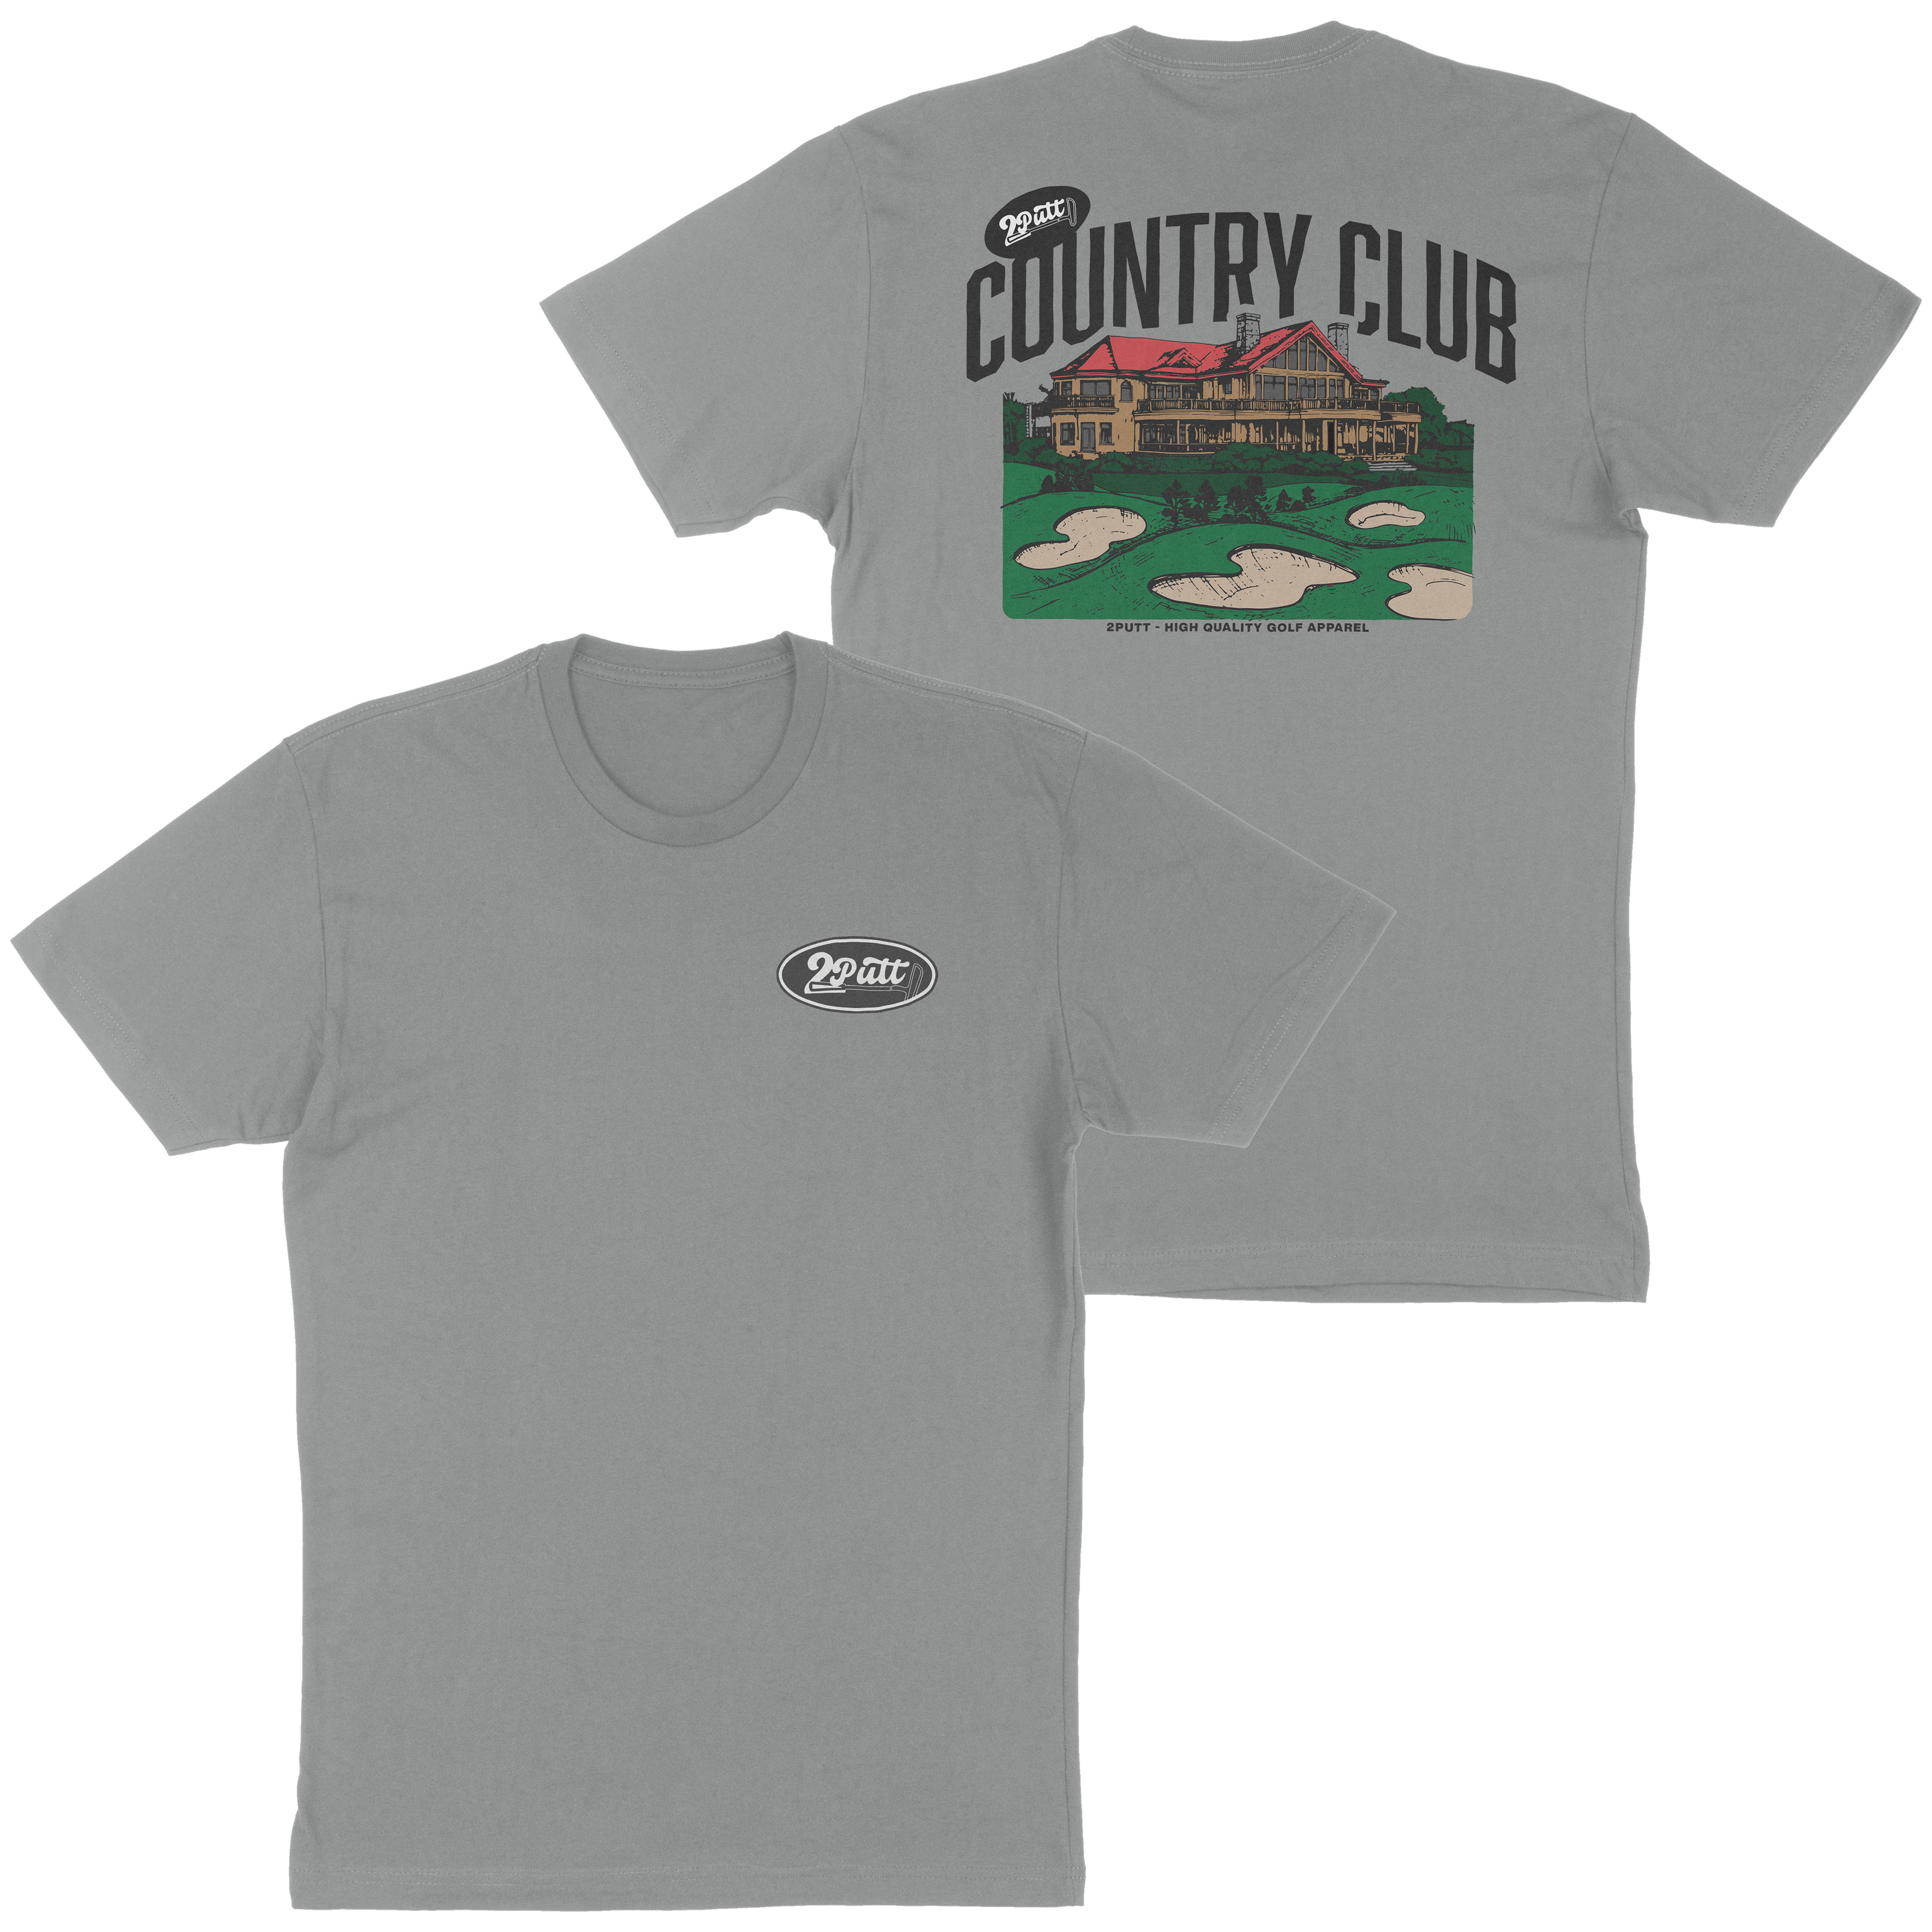 Country Club Tee - 2putt